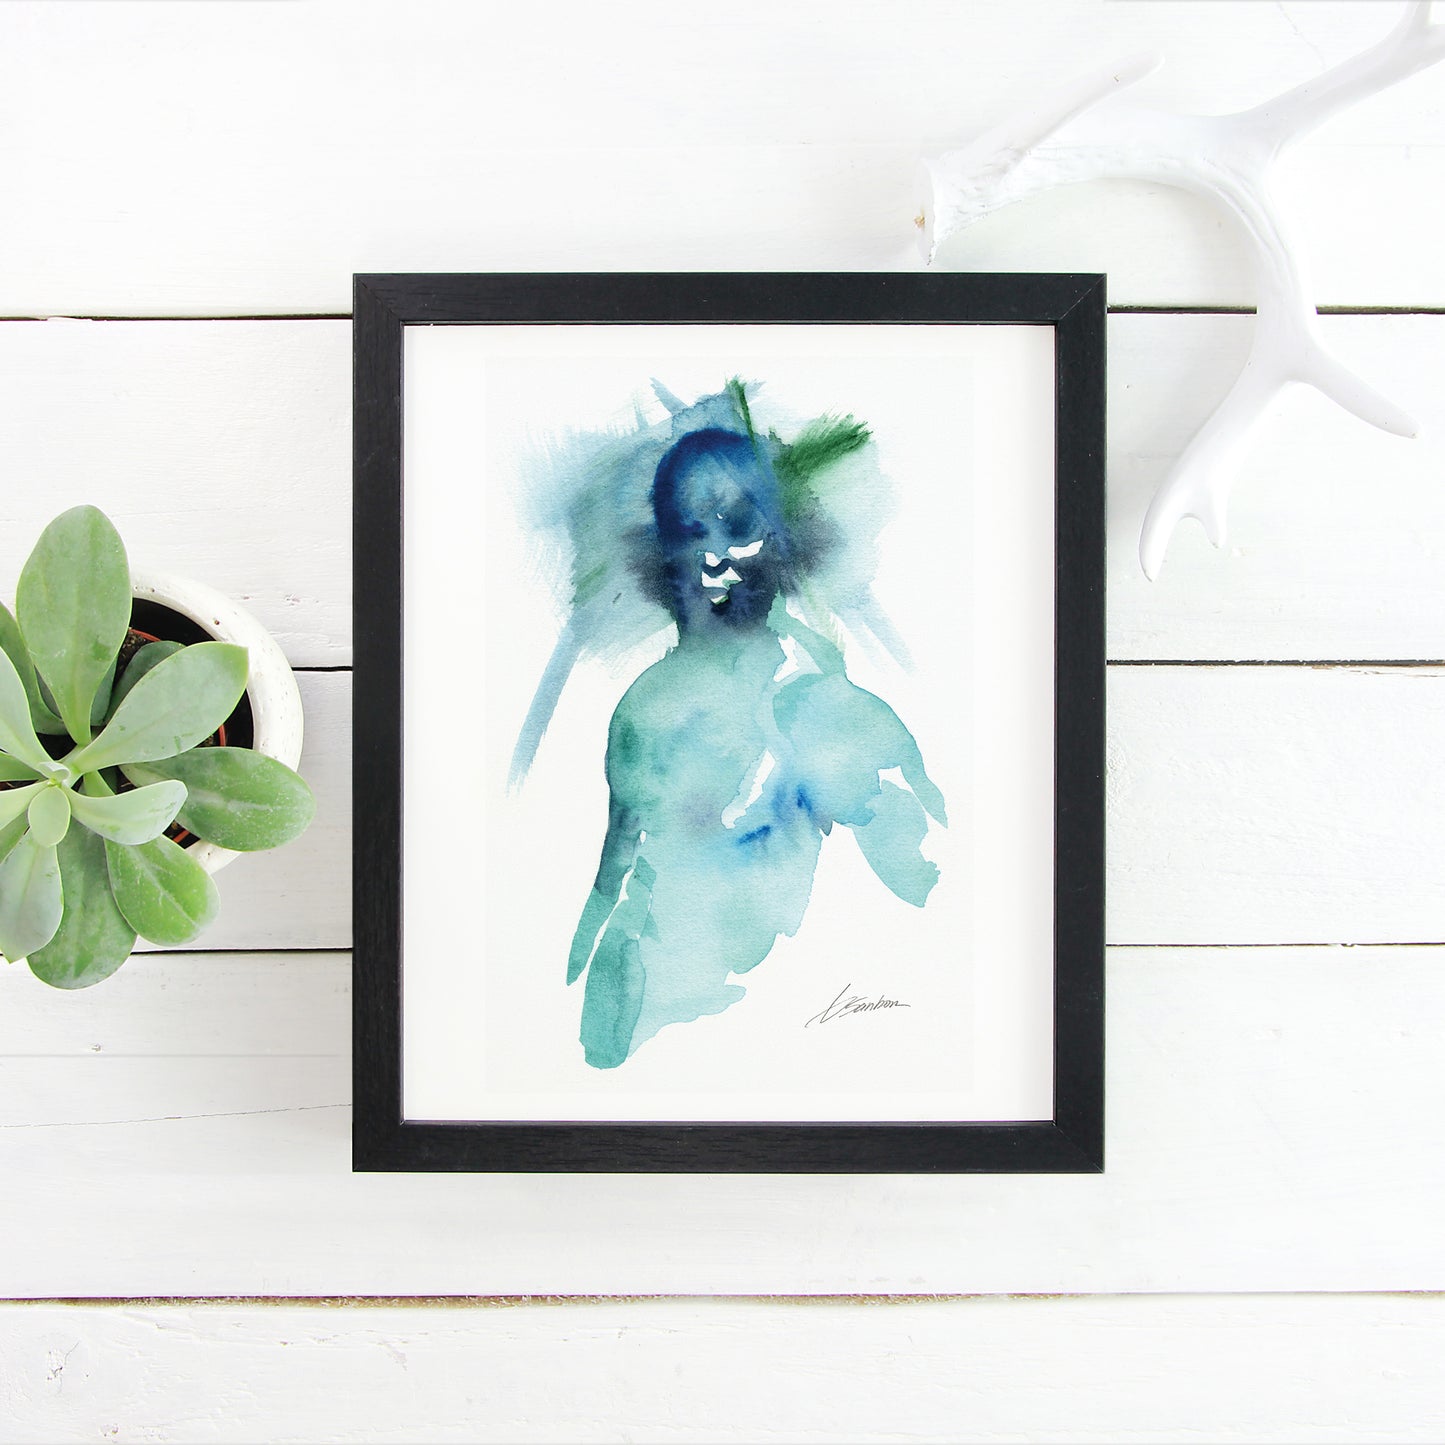 Abstract Male Figure in Blue Watercolor Painting - 6x9" Original Artwork